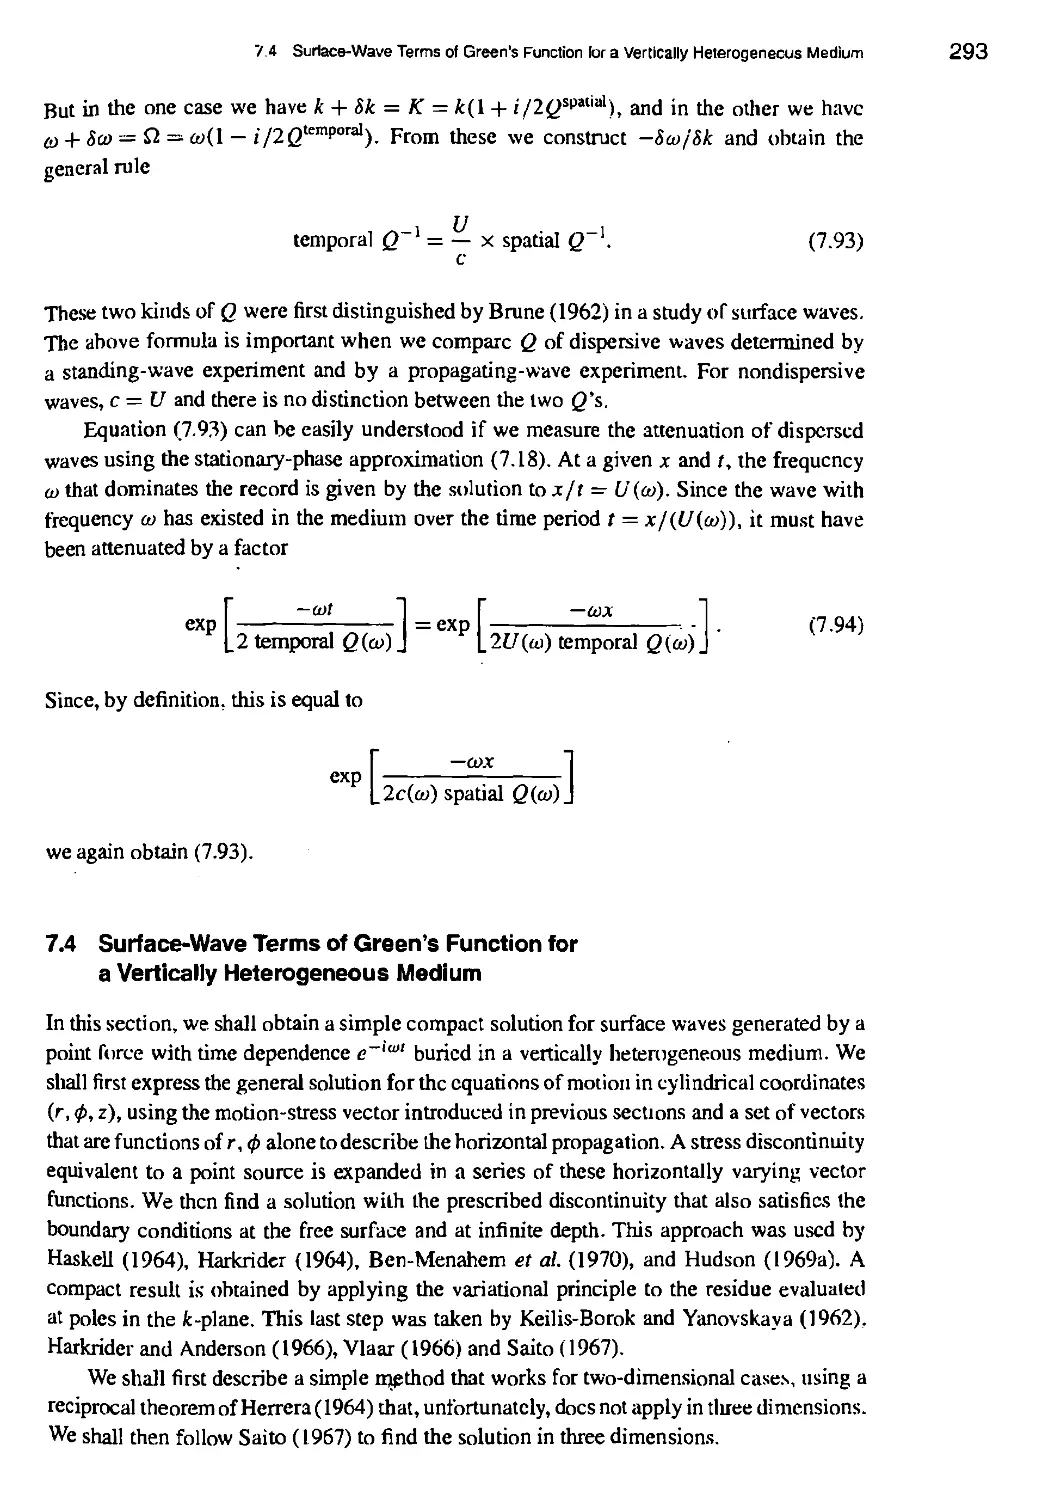 7.4 Surface-Wave Terms of Green's Function for a Vertically Heterogeneous Medium